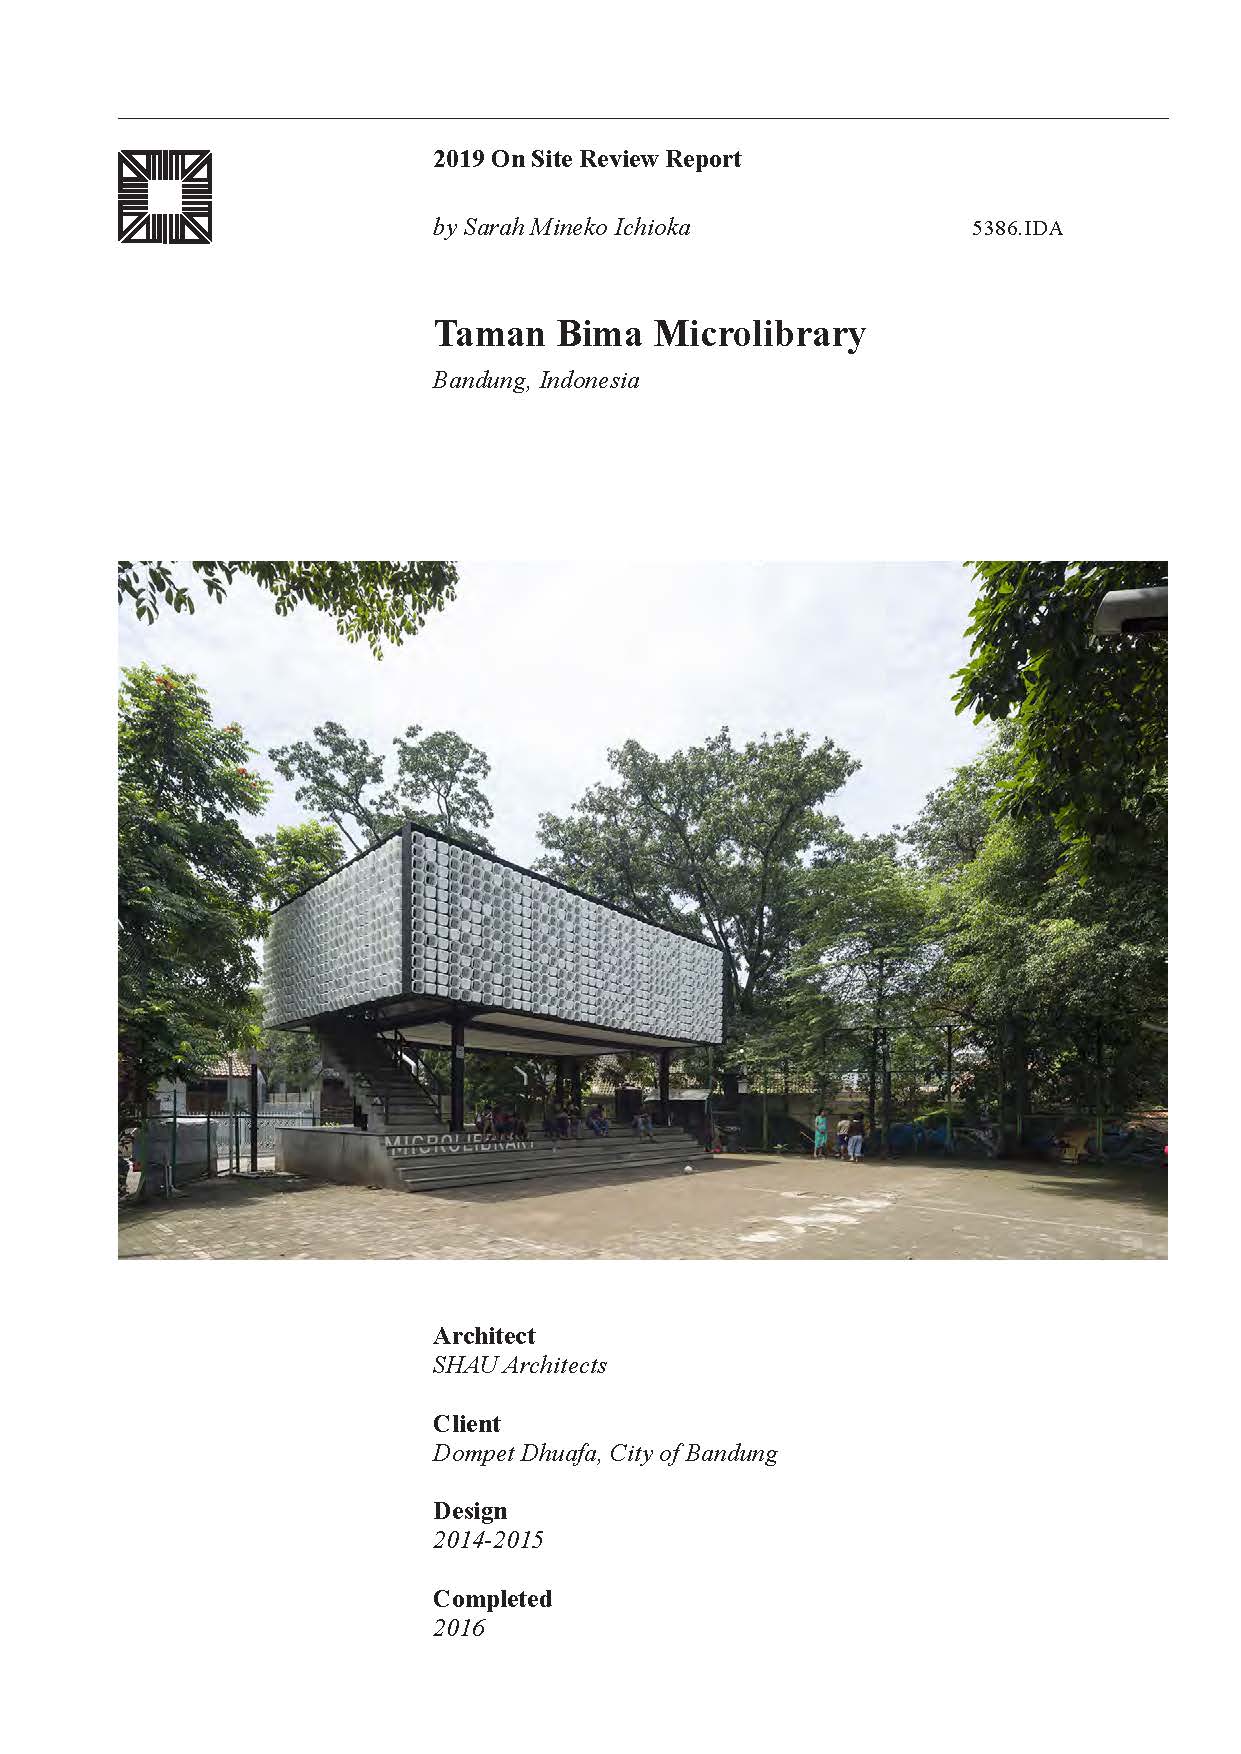 Taman Bima Microlibrary On-site Review Report